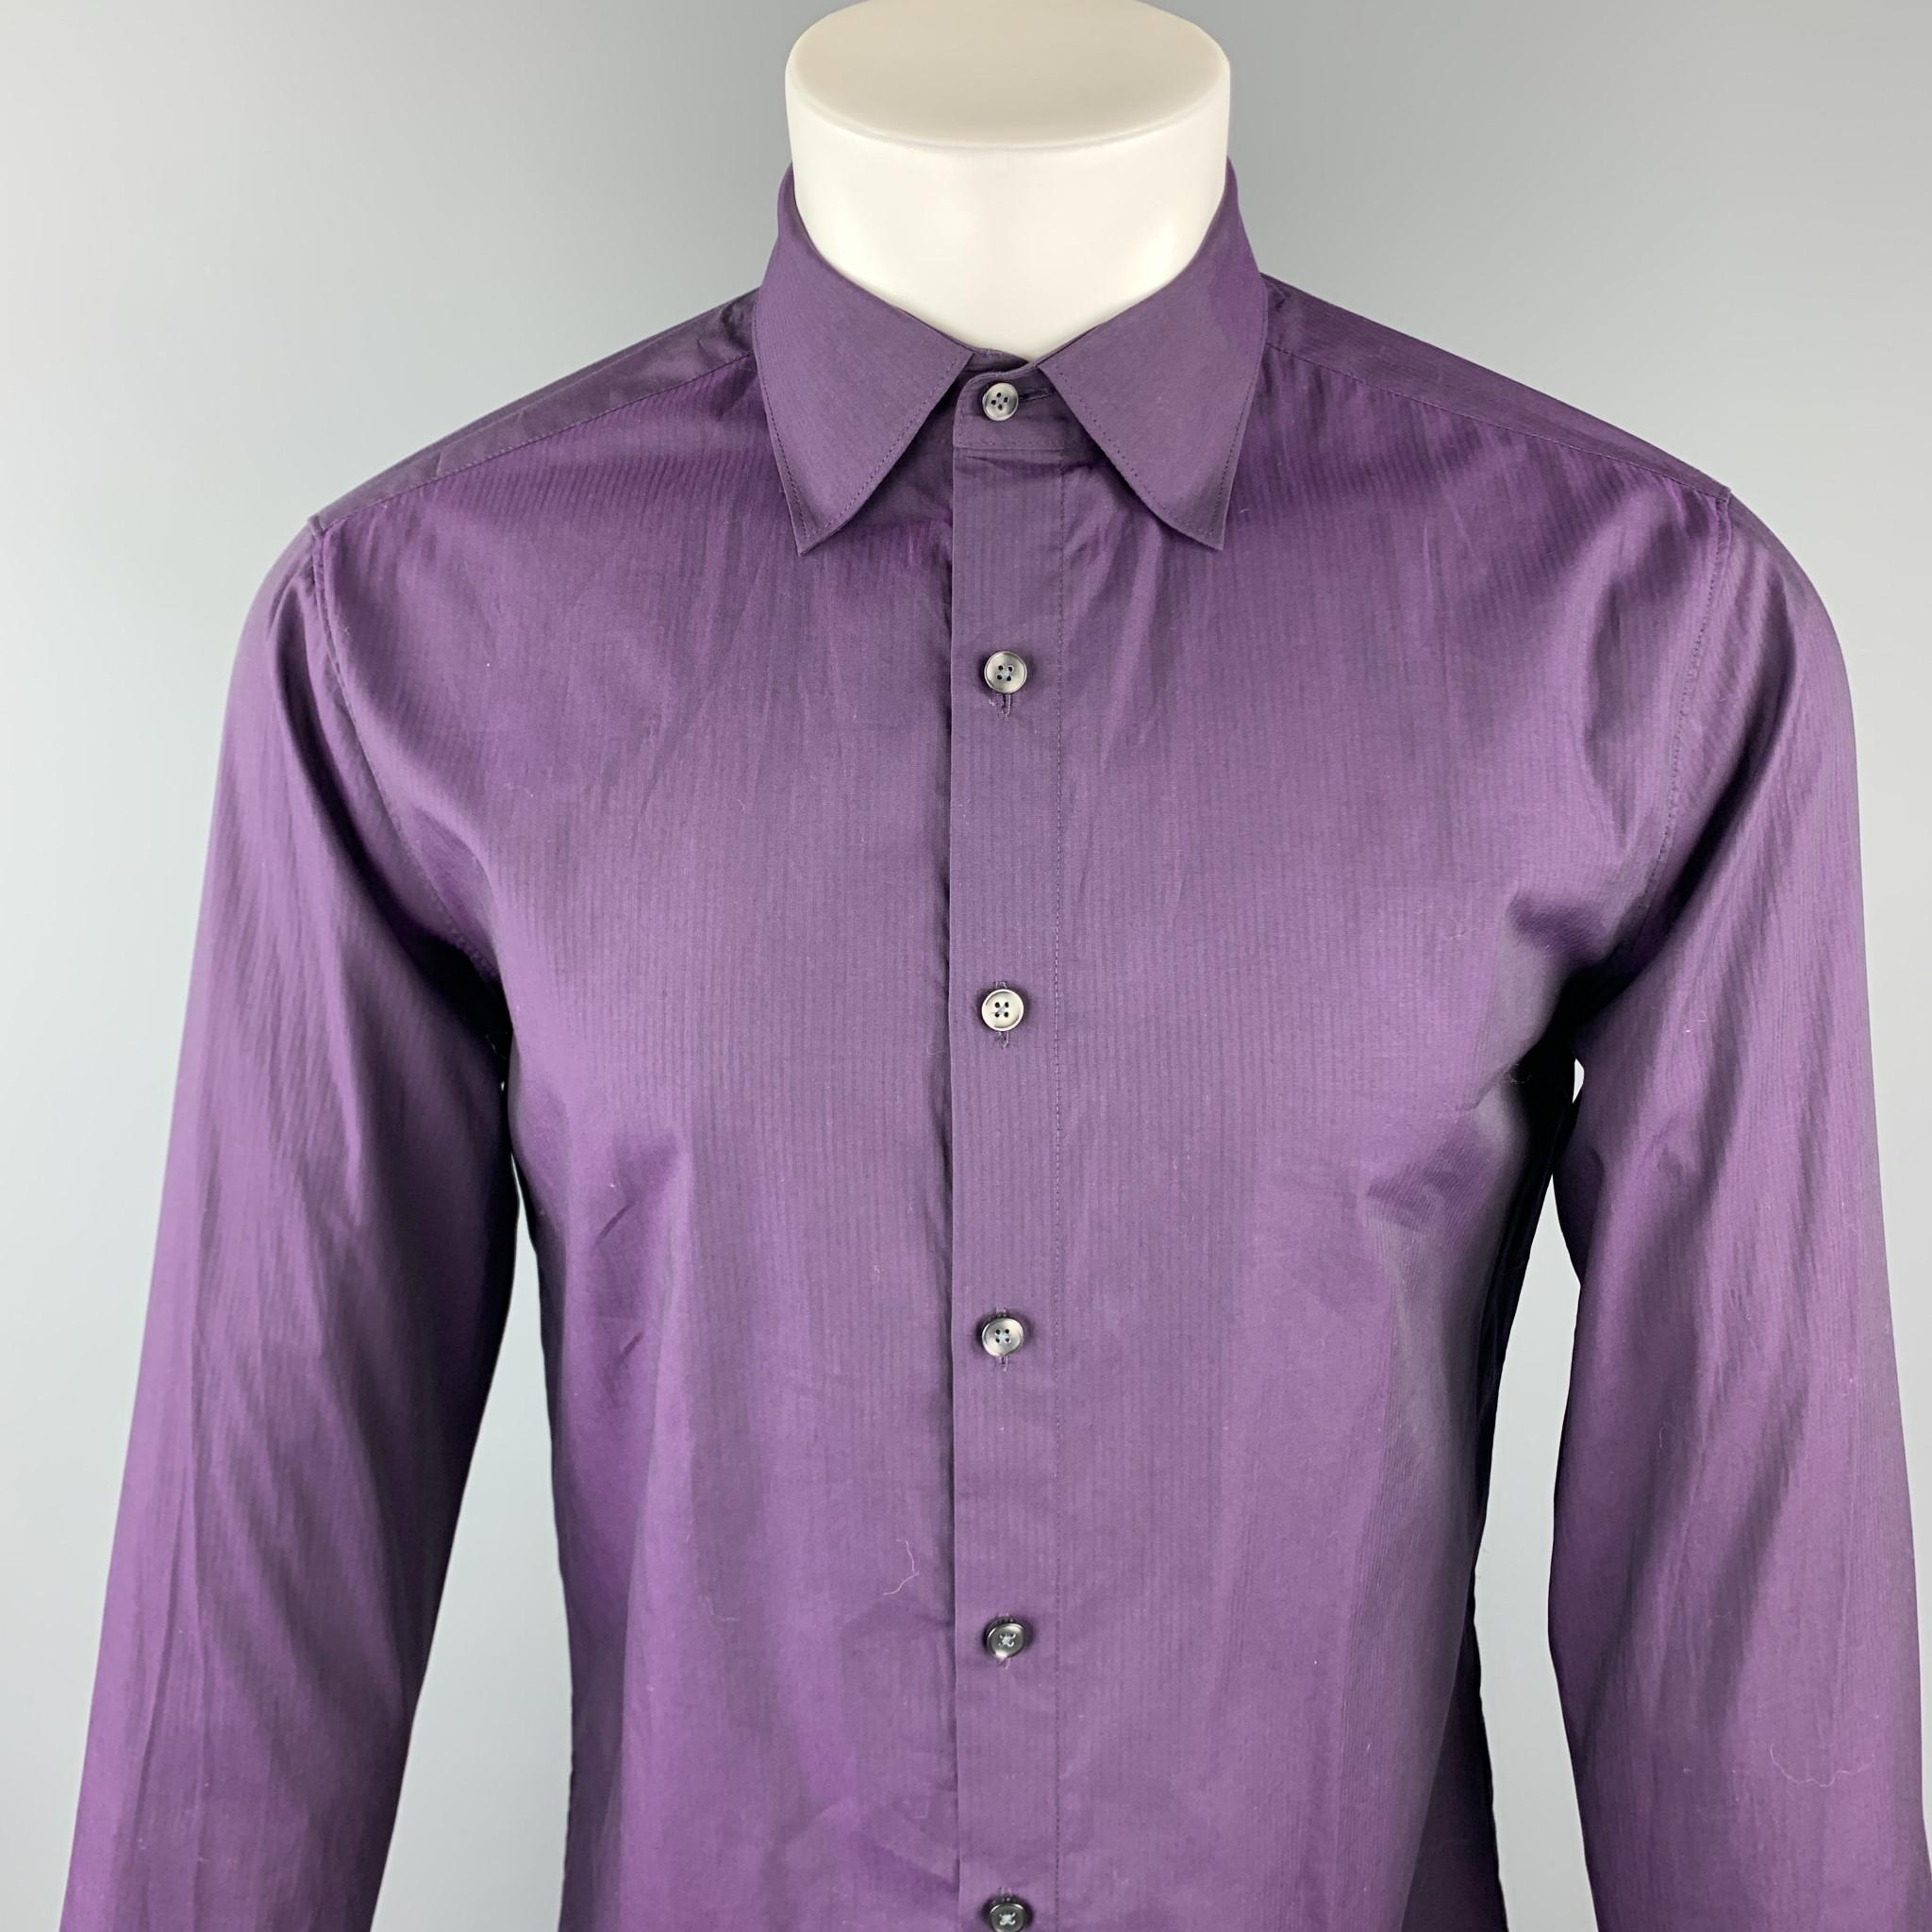 THEORY long sleeve shirt comes in a purple cotton featuring a button up style.

New With Tags.
Marked: M

Measurements:

Shoulder: 16 in.
Chest: 42 in.
Sleeve: 26.5 in.
Length: 29.5 in. 